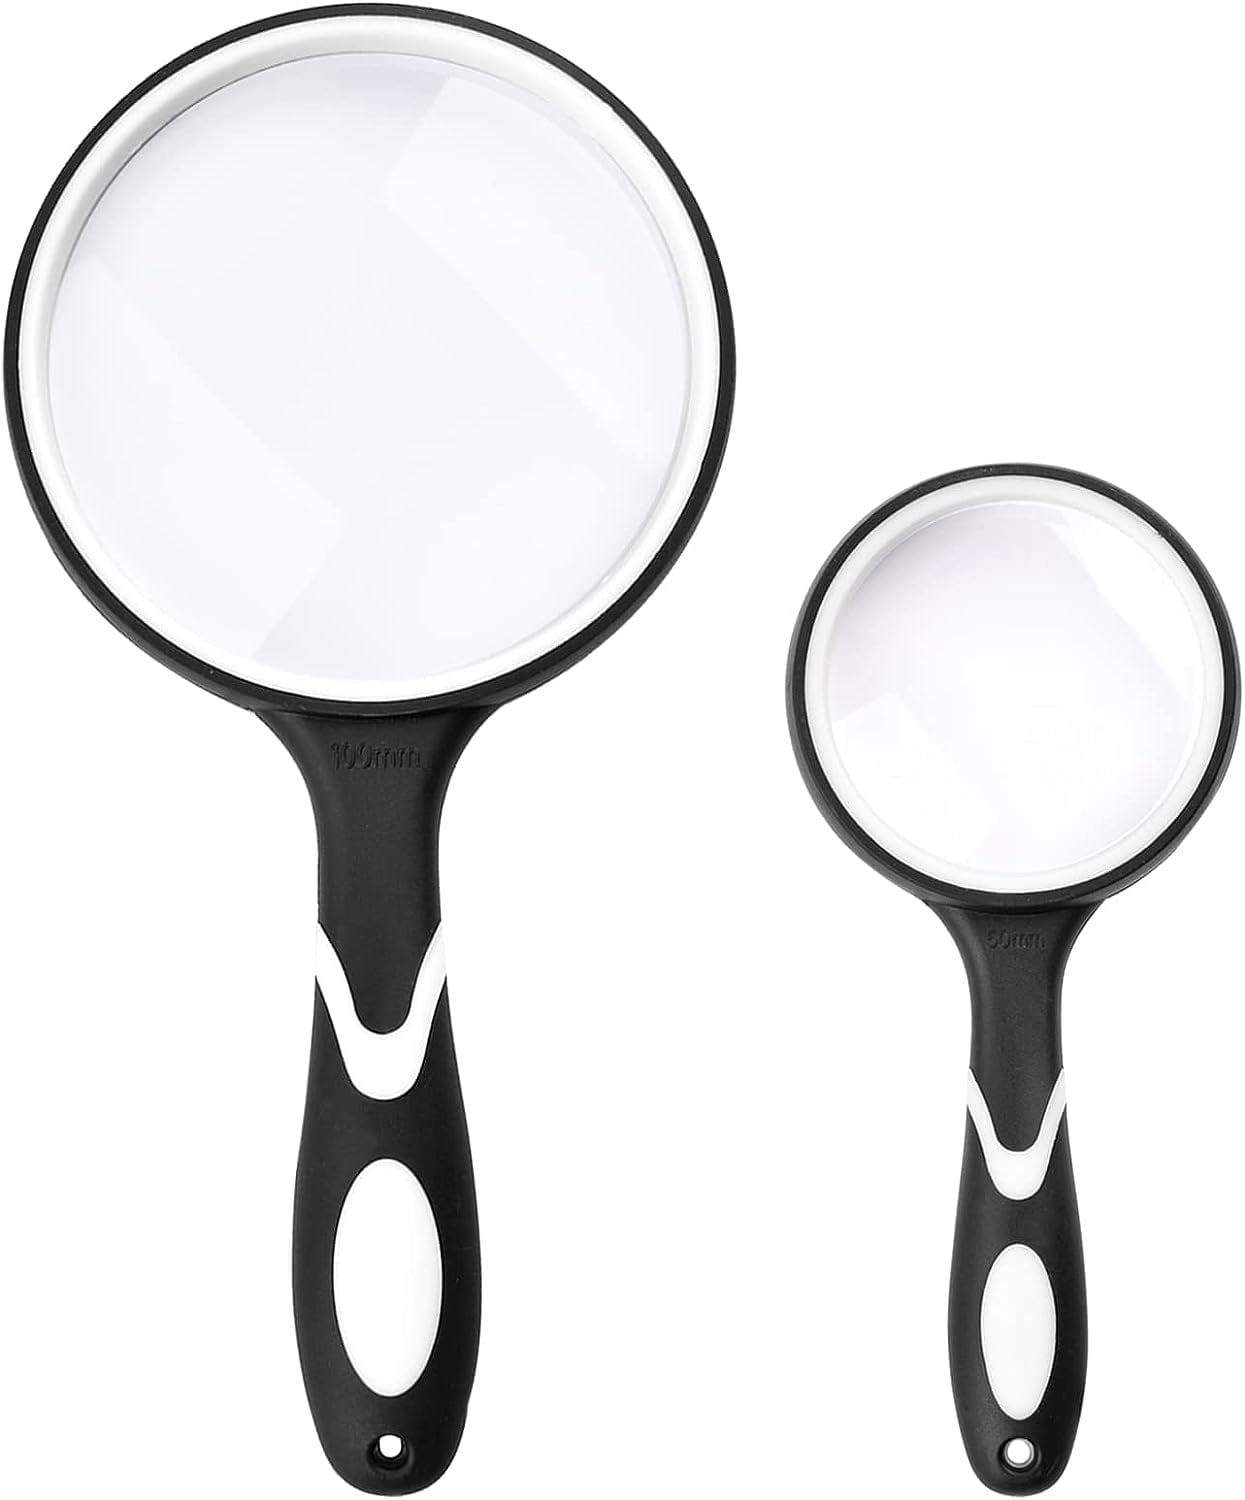  3pcs Folding Magnifying Glass magnifiers 100x Magnifying Glass  for trichomes Magnify Glass Magnifying Glasses with Light magnafining Glass  Magnifying Lens Key Chain abs Frame Coin : Health & Household